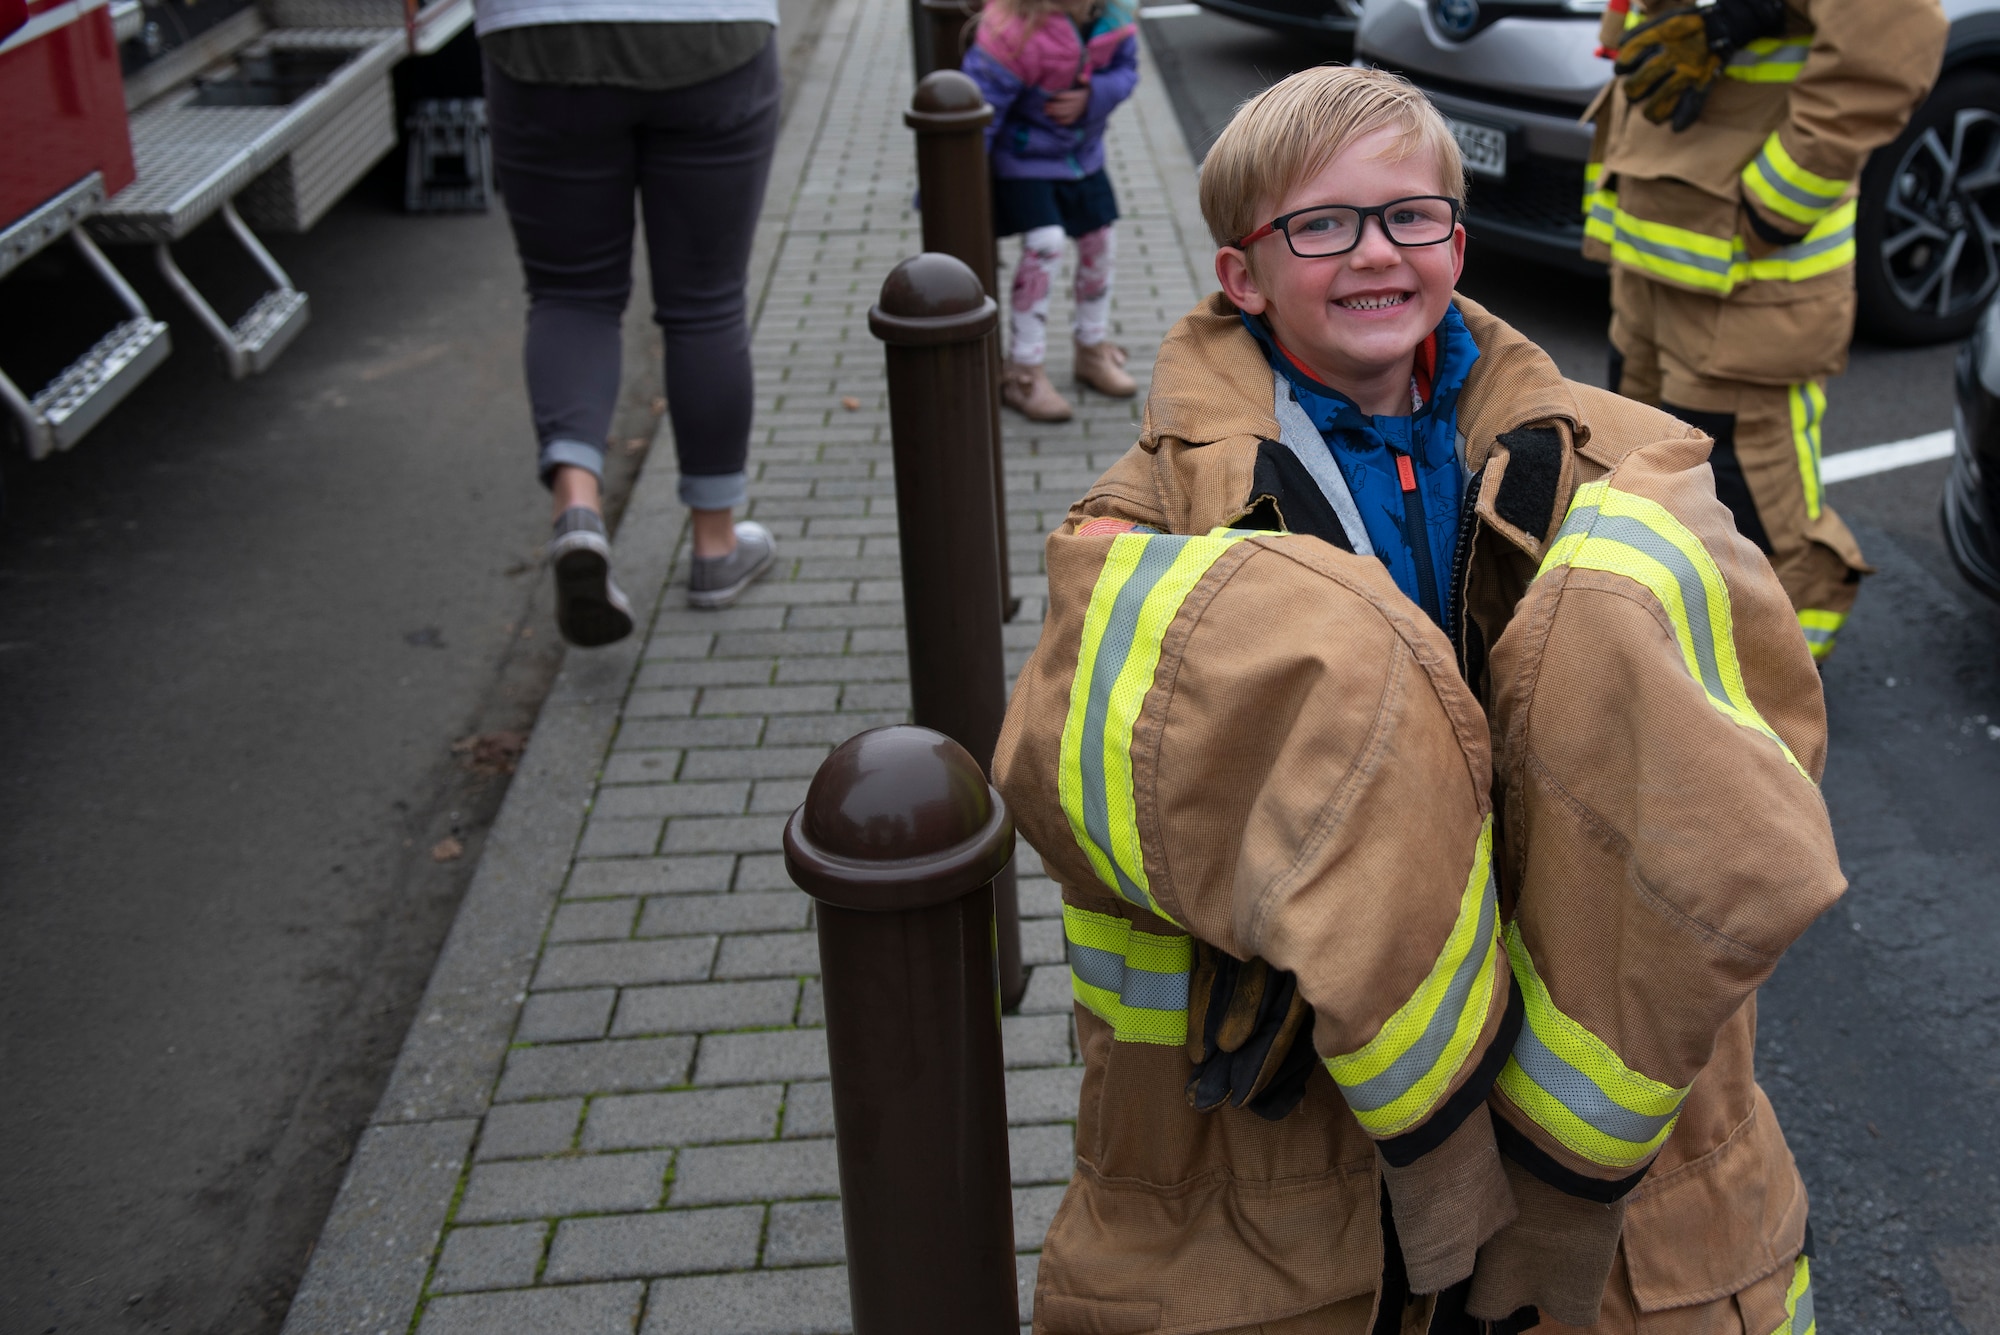 A Spangdahlem Elementary School student wears the protective coat of a Spangdahlem Air Base firefighter at SPES on Spangdahlem Air Base, Germany, Oct. 23, 2019. Students tried on fire gear and learned how firefighters don equipment in a matter of seconds. (U.S. Air Force photo by Airman 1st Class Alison Stewart)